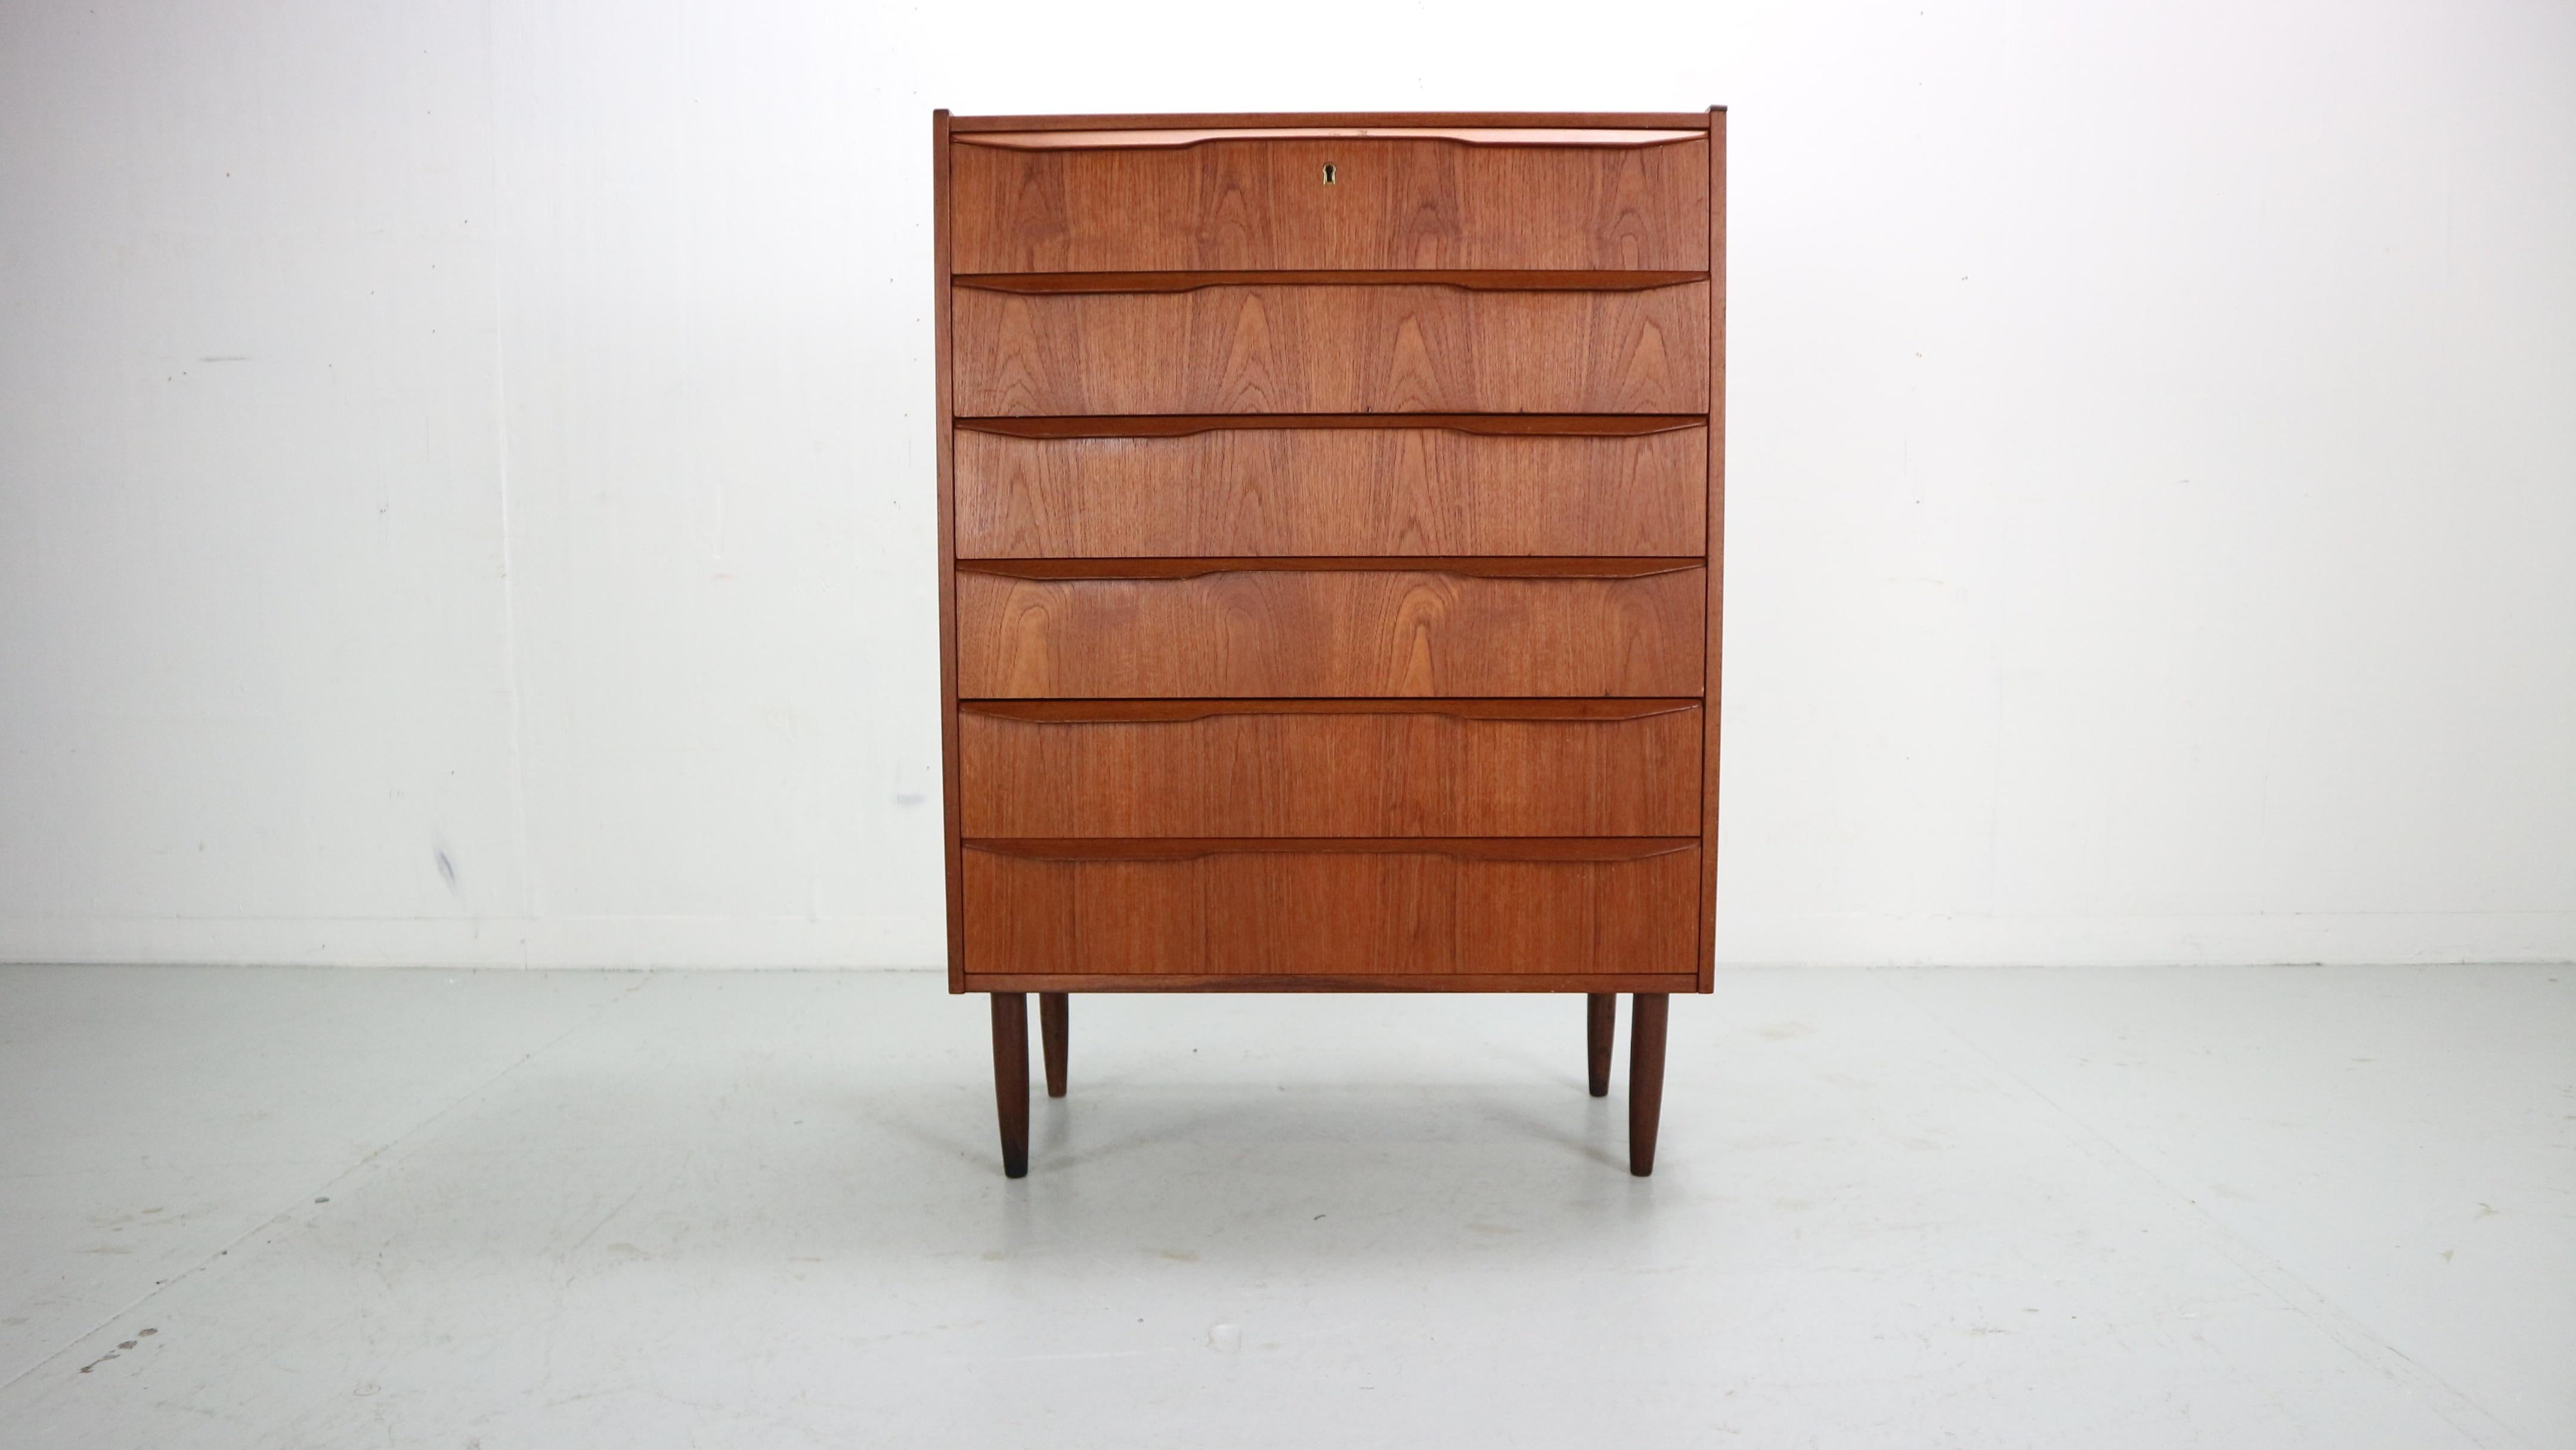 Mid- Century modern period chest of 6 drawers or tallboy cabinet made in 1960's Denmark.

Made of teak wood veneer. Elegant handles.
Good working sliding drawers.
High quality Danish furniture.

The cabinet is in a good vintage condition.
It has